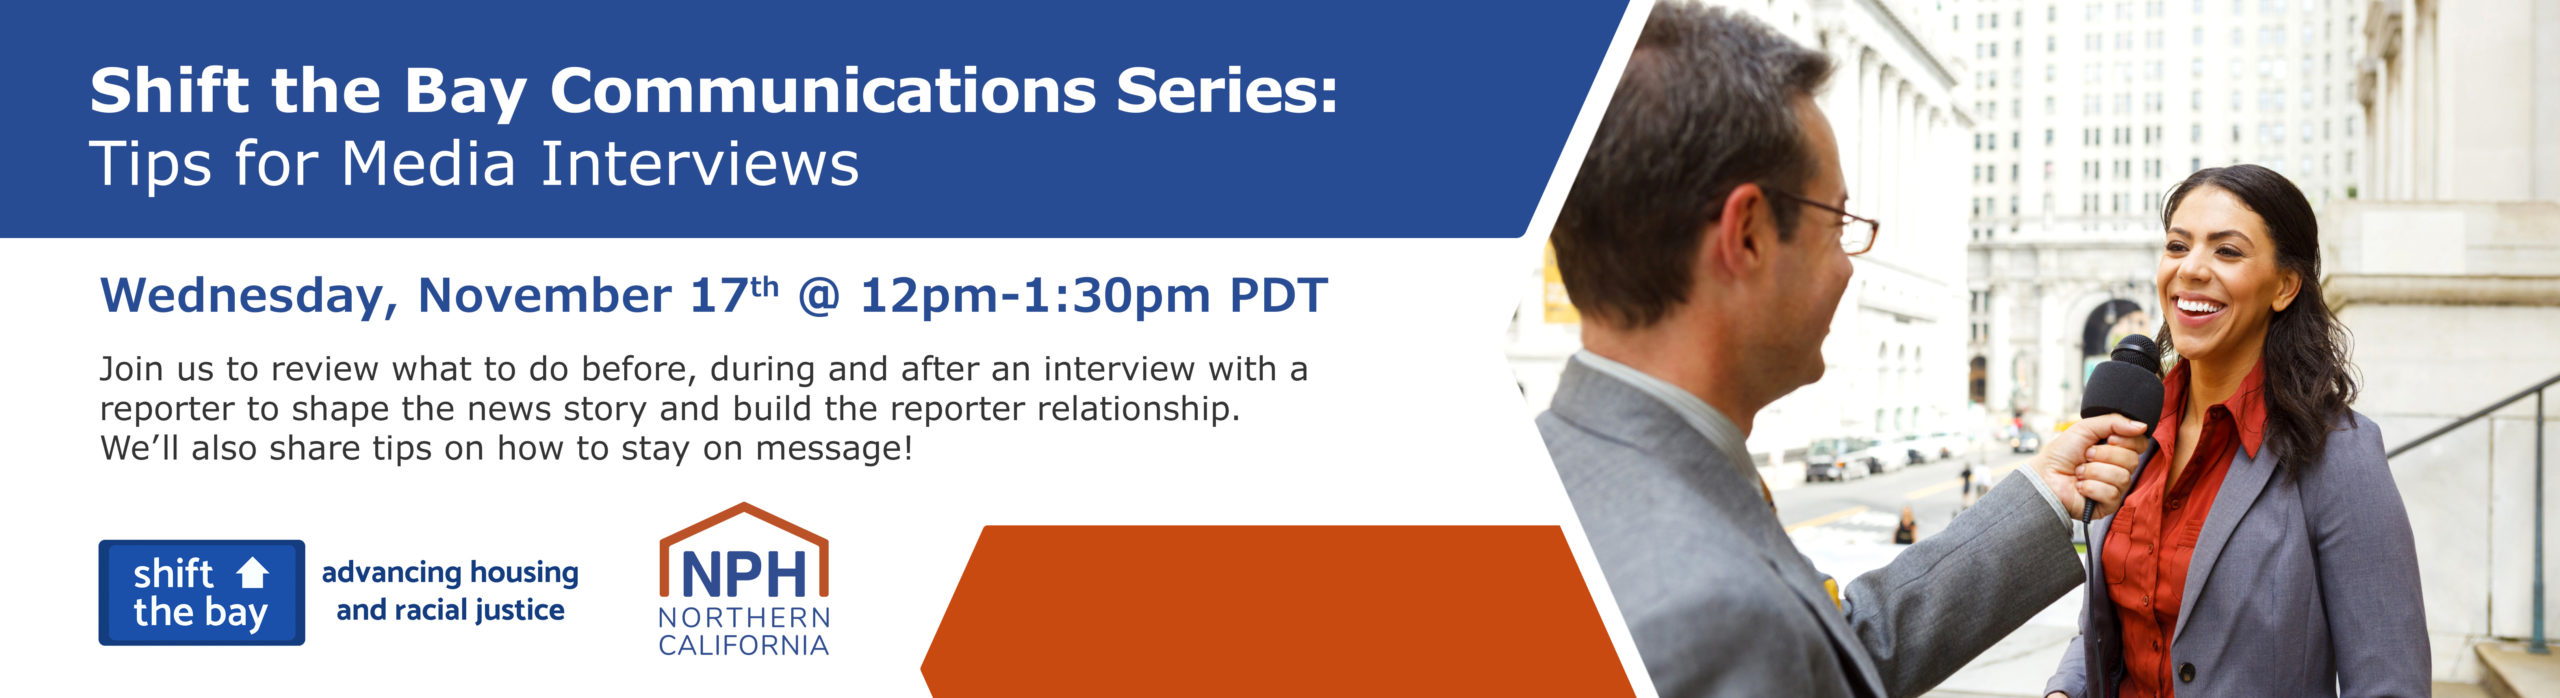 Shift the Bay Communications Series: Tips for Media Interviews